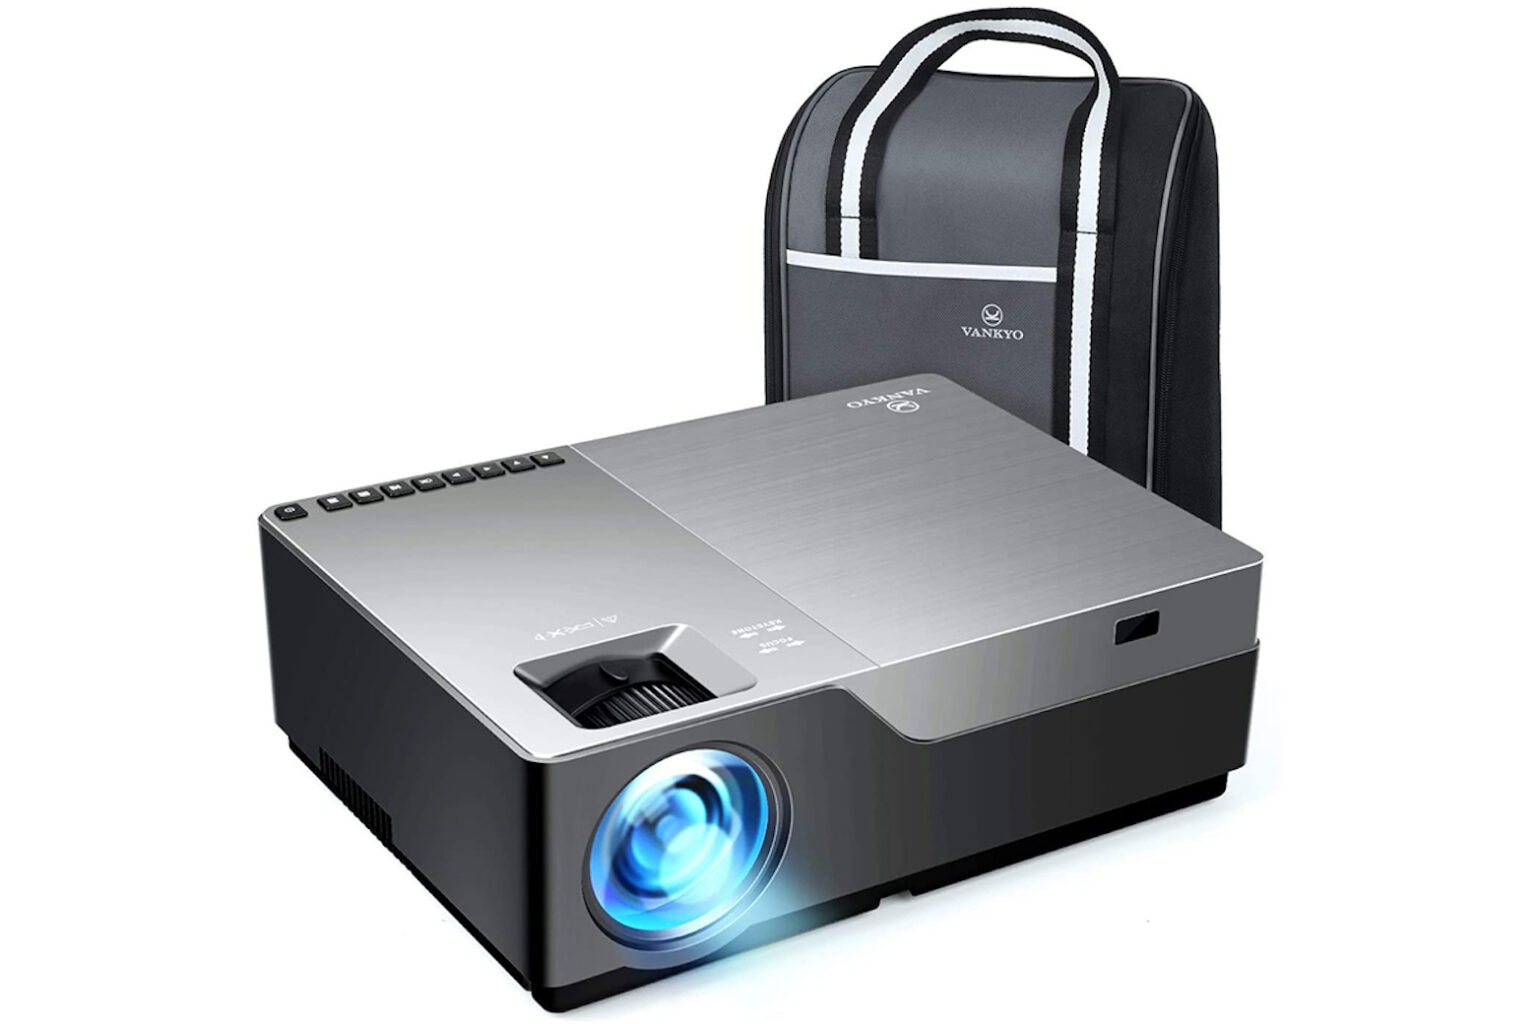 This projector delivers impeccable image quality for both professional and personal use